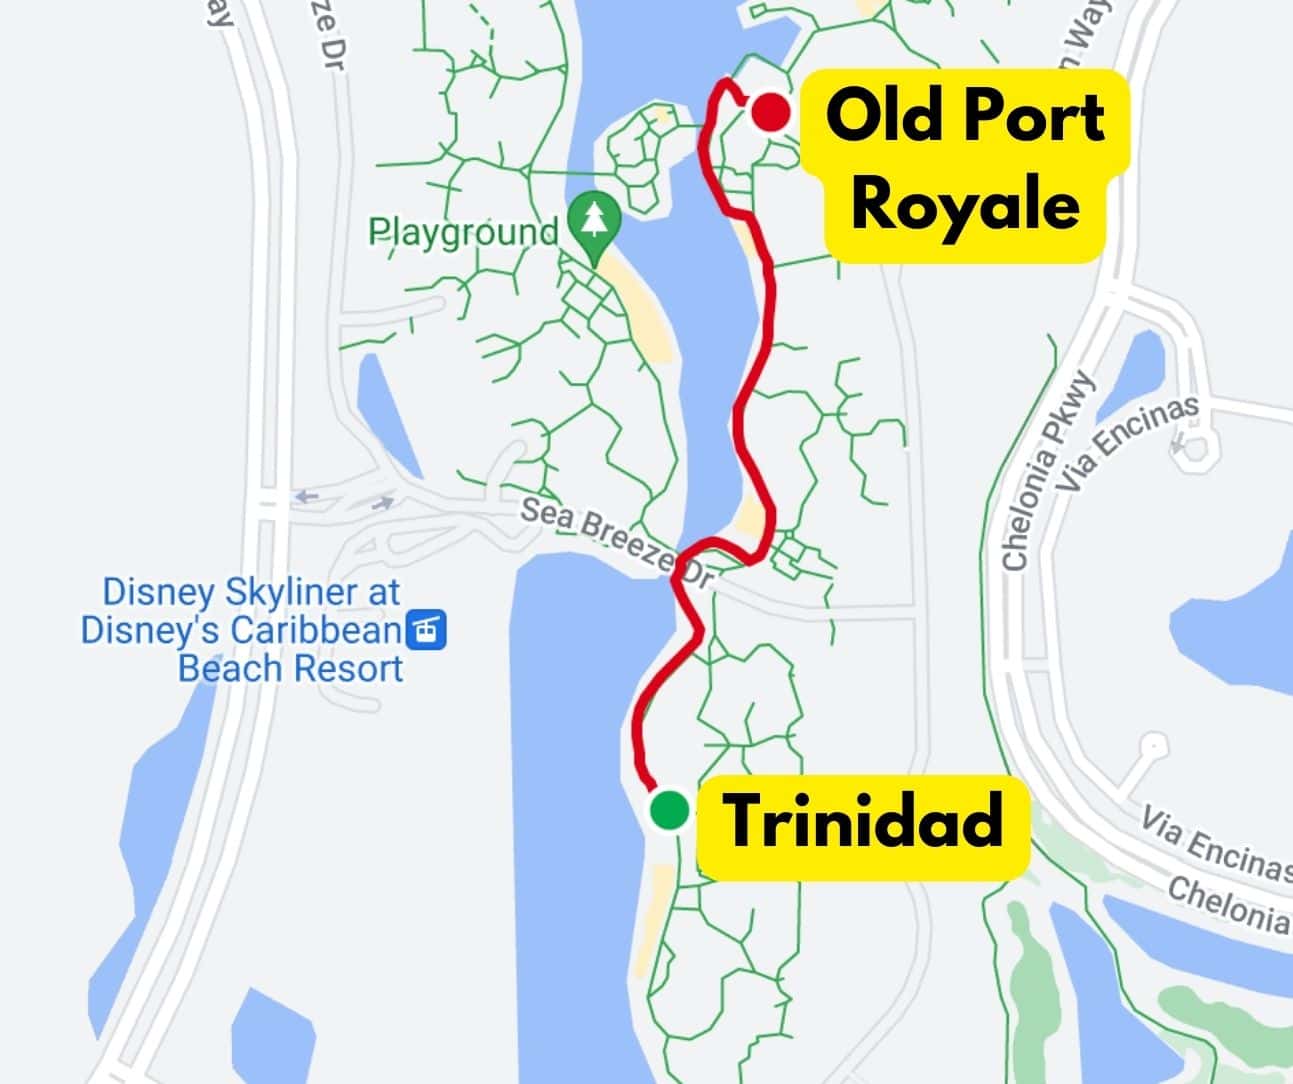 walking distance from Trinidad to Old Port Royale 